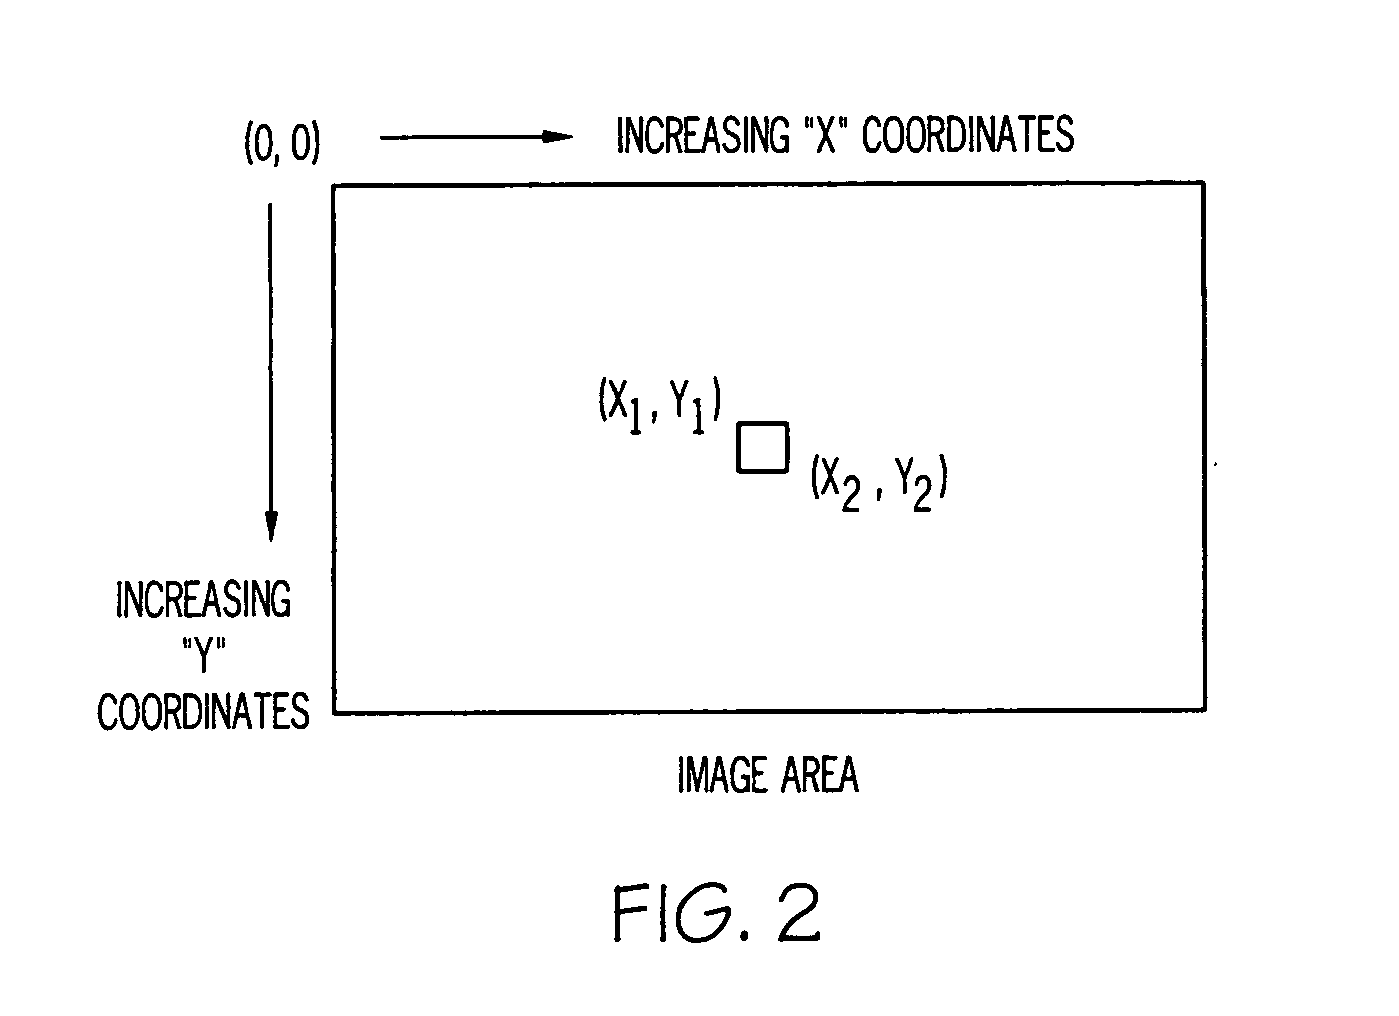 Method for collecting data for color measurements from a digital electronic image capturing device or system